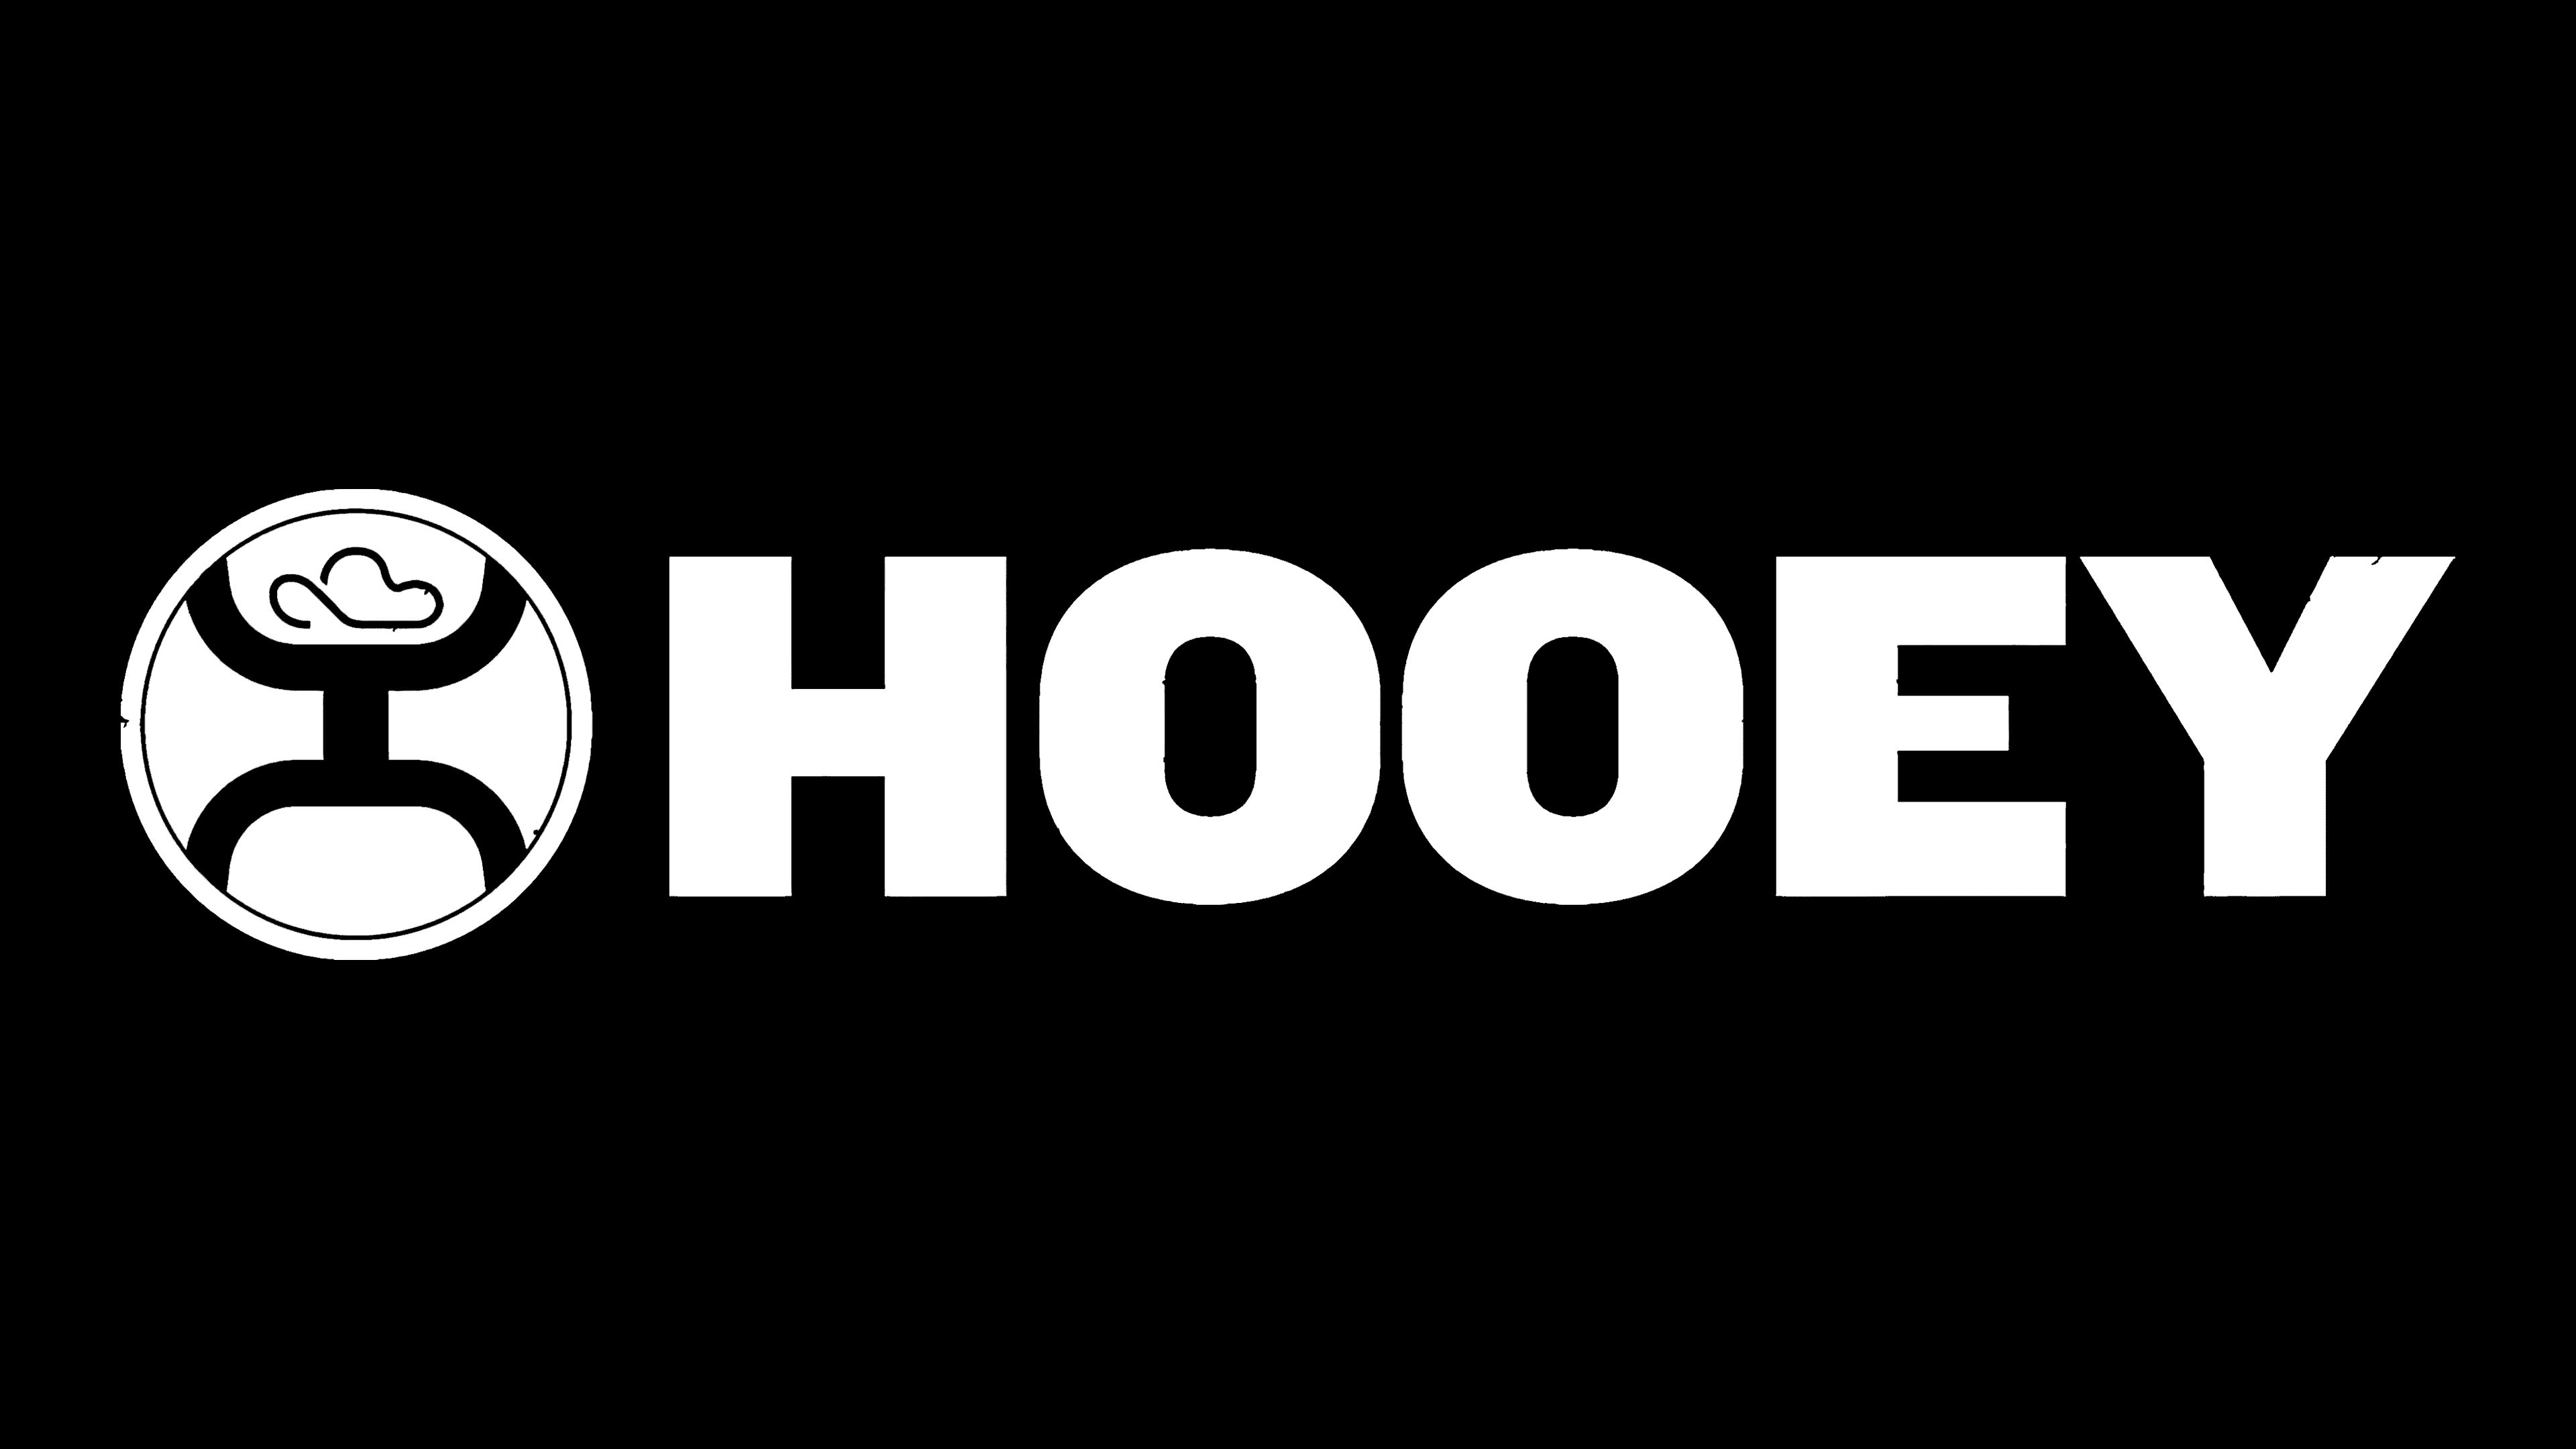 Hooey Logo, symbol, meaning, history, PNG, brand